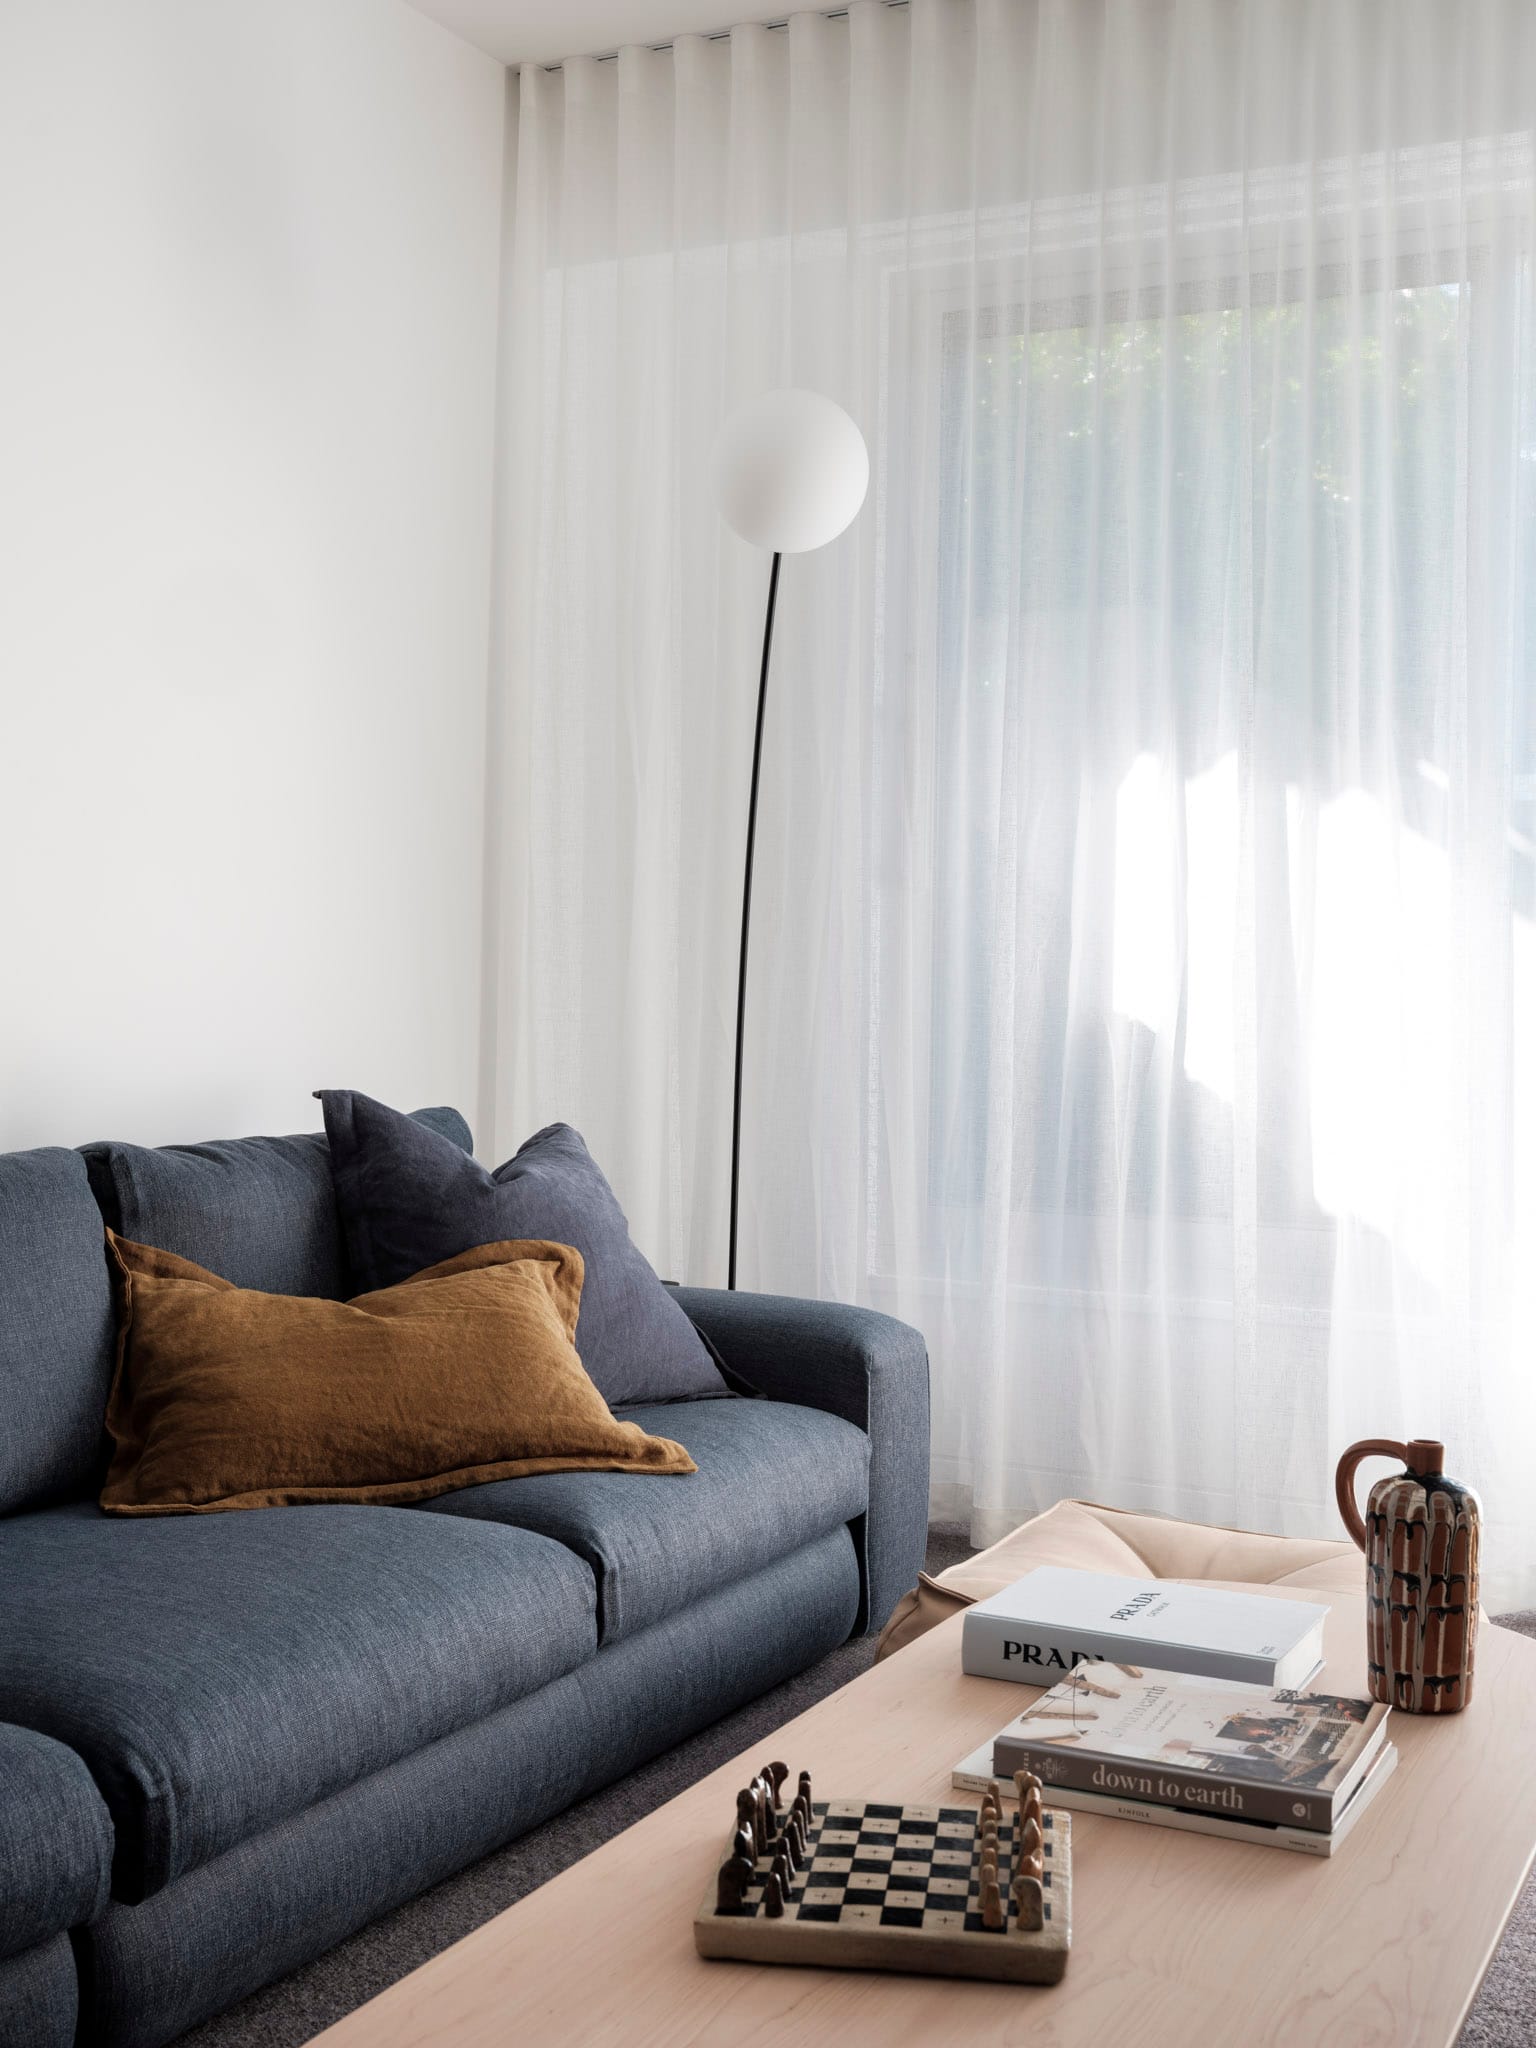 Kasa Byron Bay. Photography by Tom Ferguson. Navy couch and timber coffee table. White curtains in background. Simple lamp with black stem and white orb. 